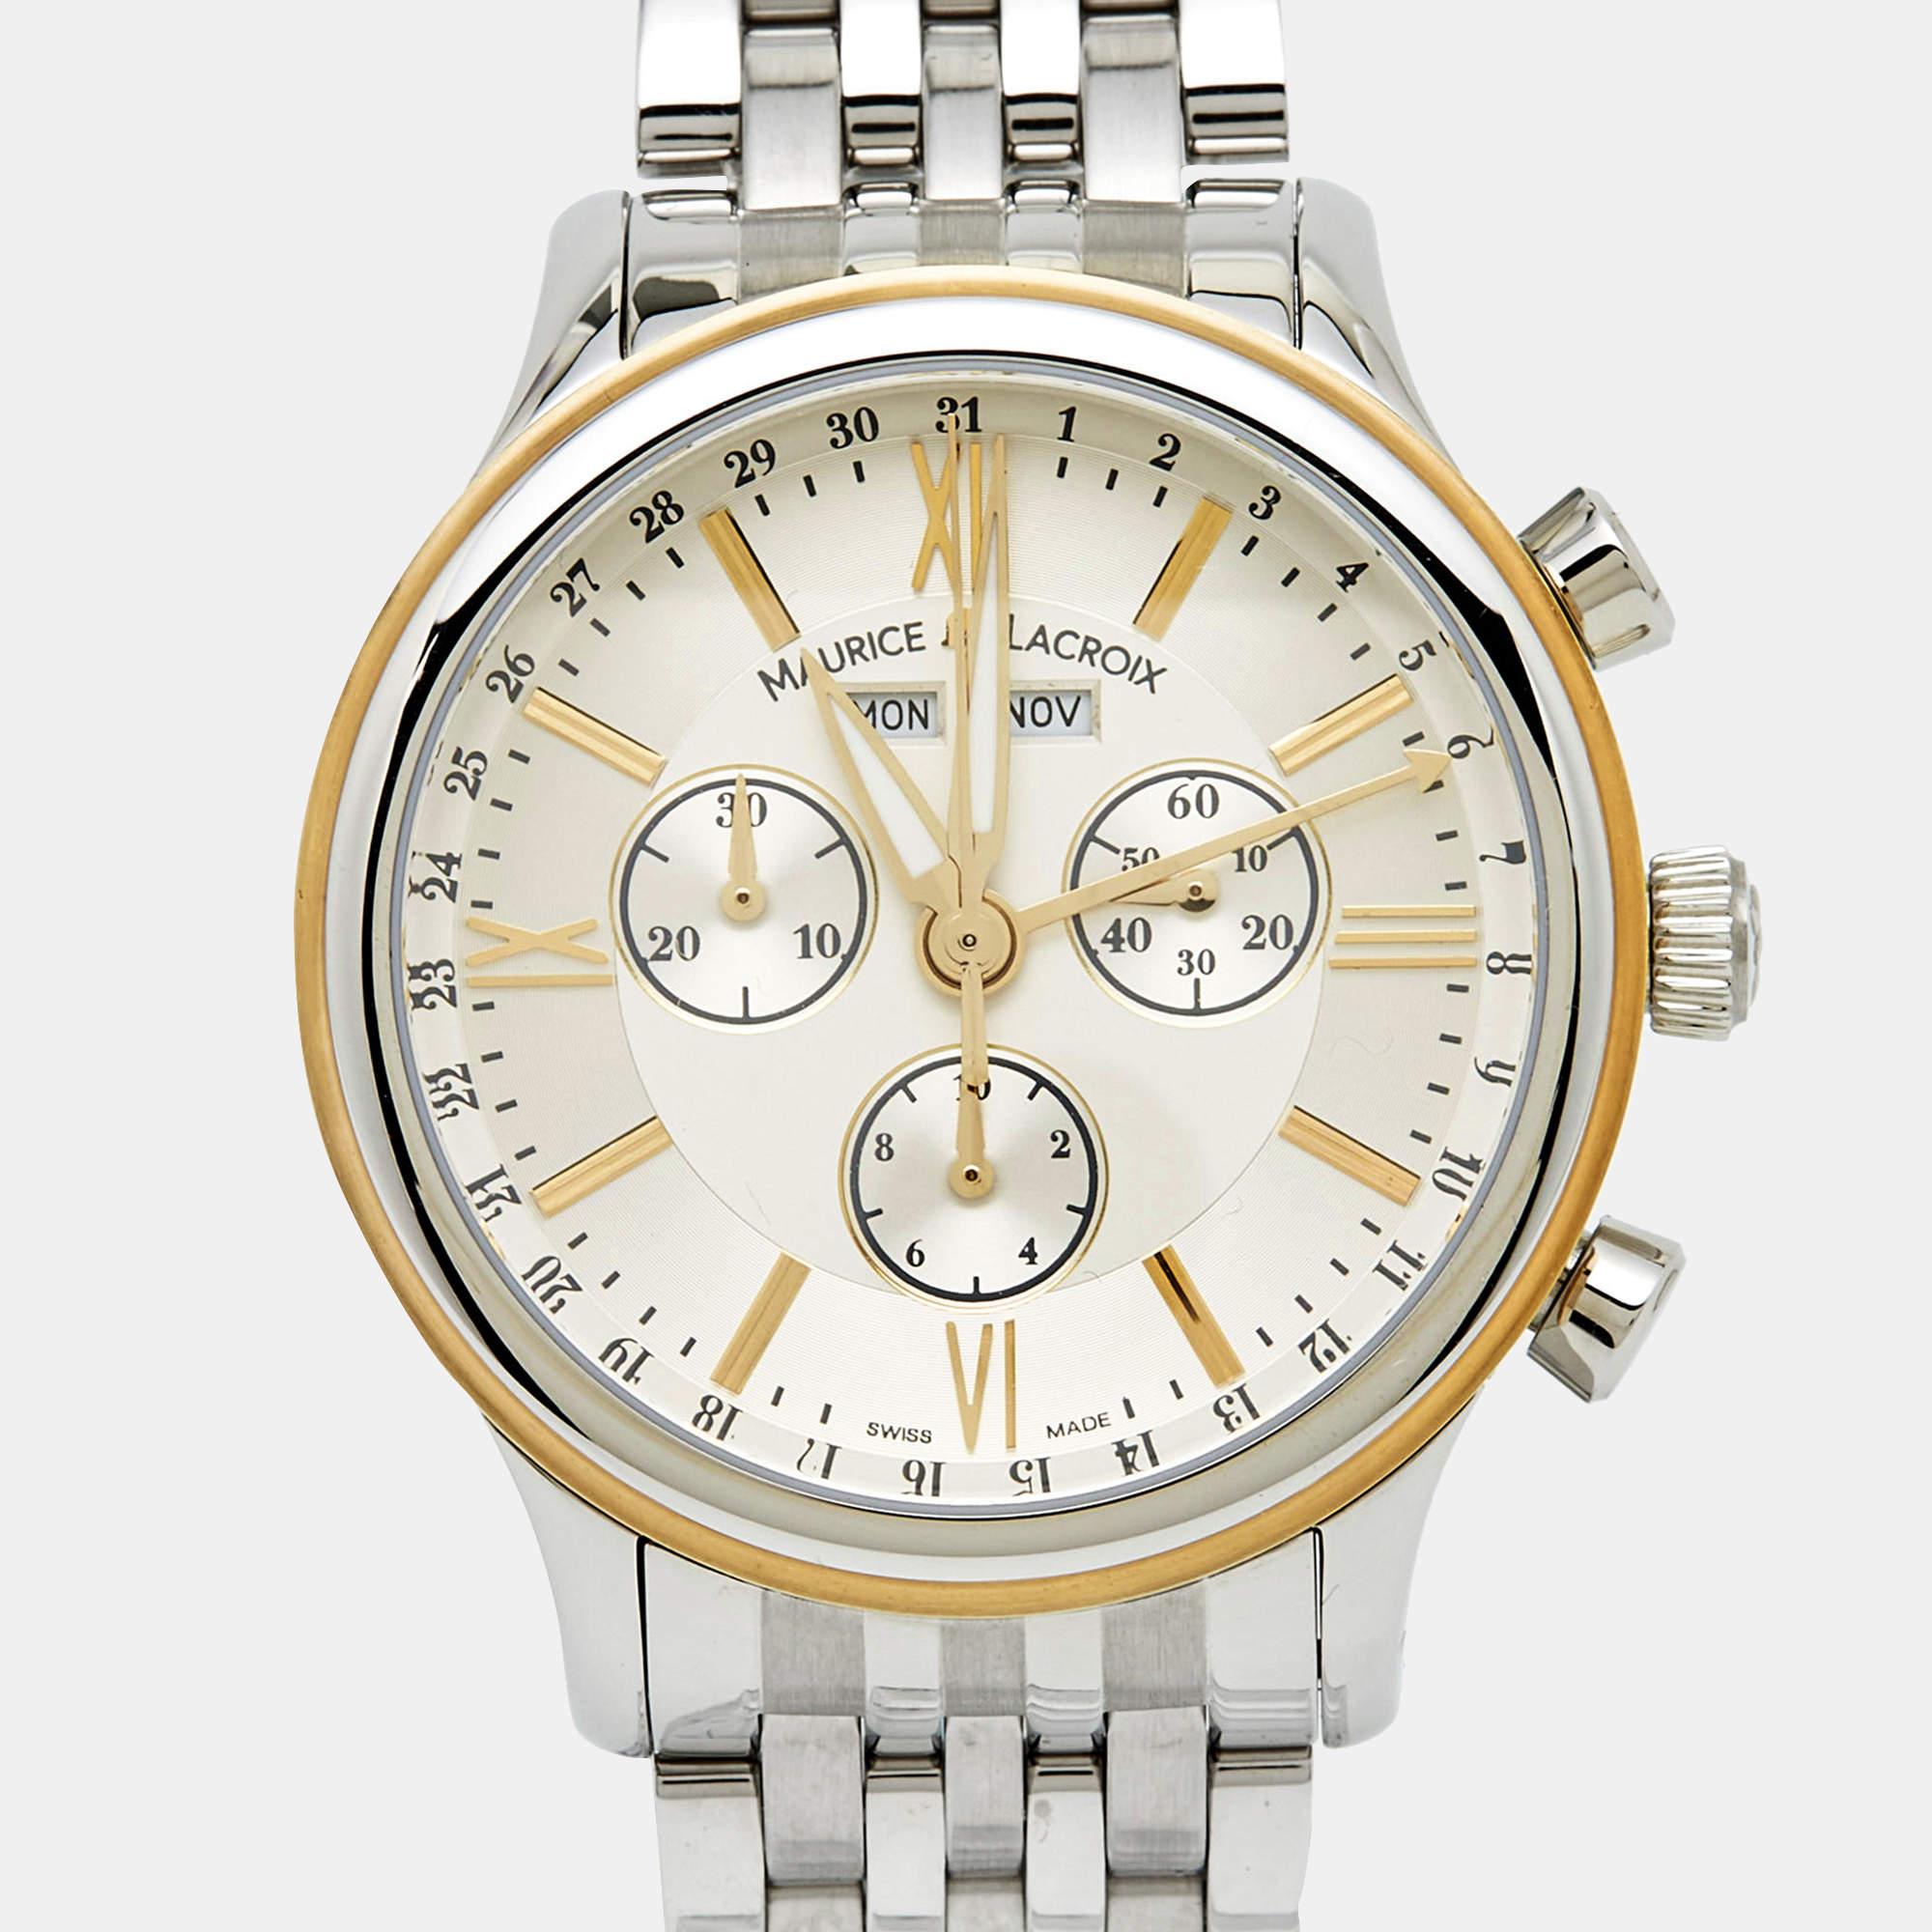 The Maurice Lacroix Les Classiques LC1098-SY011-11E is a sophisticated men's wristwatch with a 40mm case. It features a silver and gold-tone stainless steel bracelet, a white dial with a date display, and Roman numeral and index hour markers. This